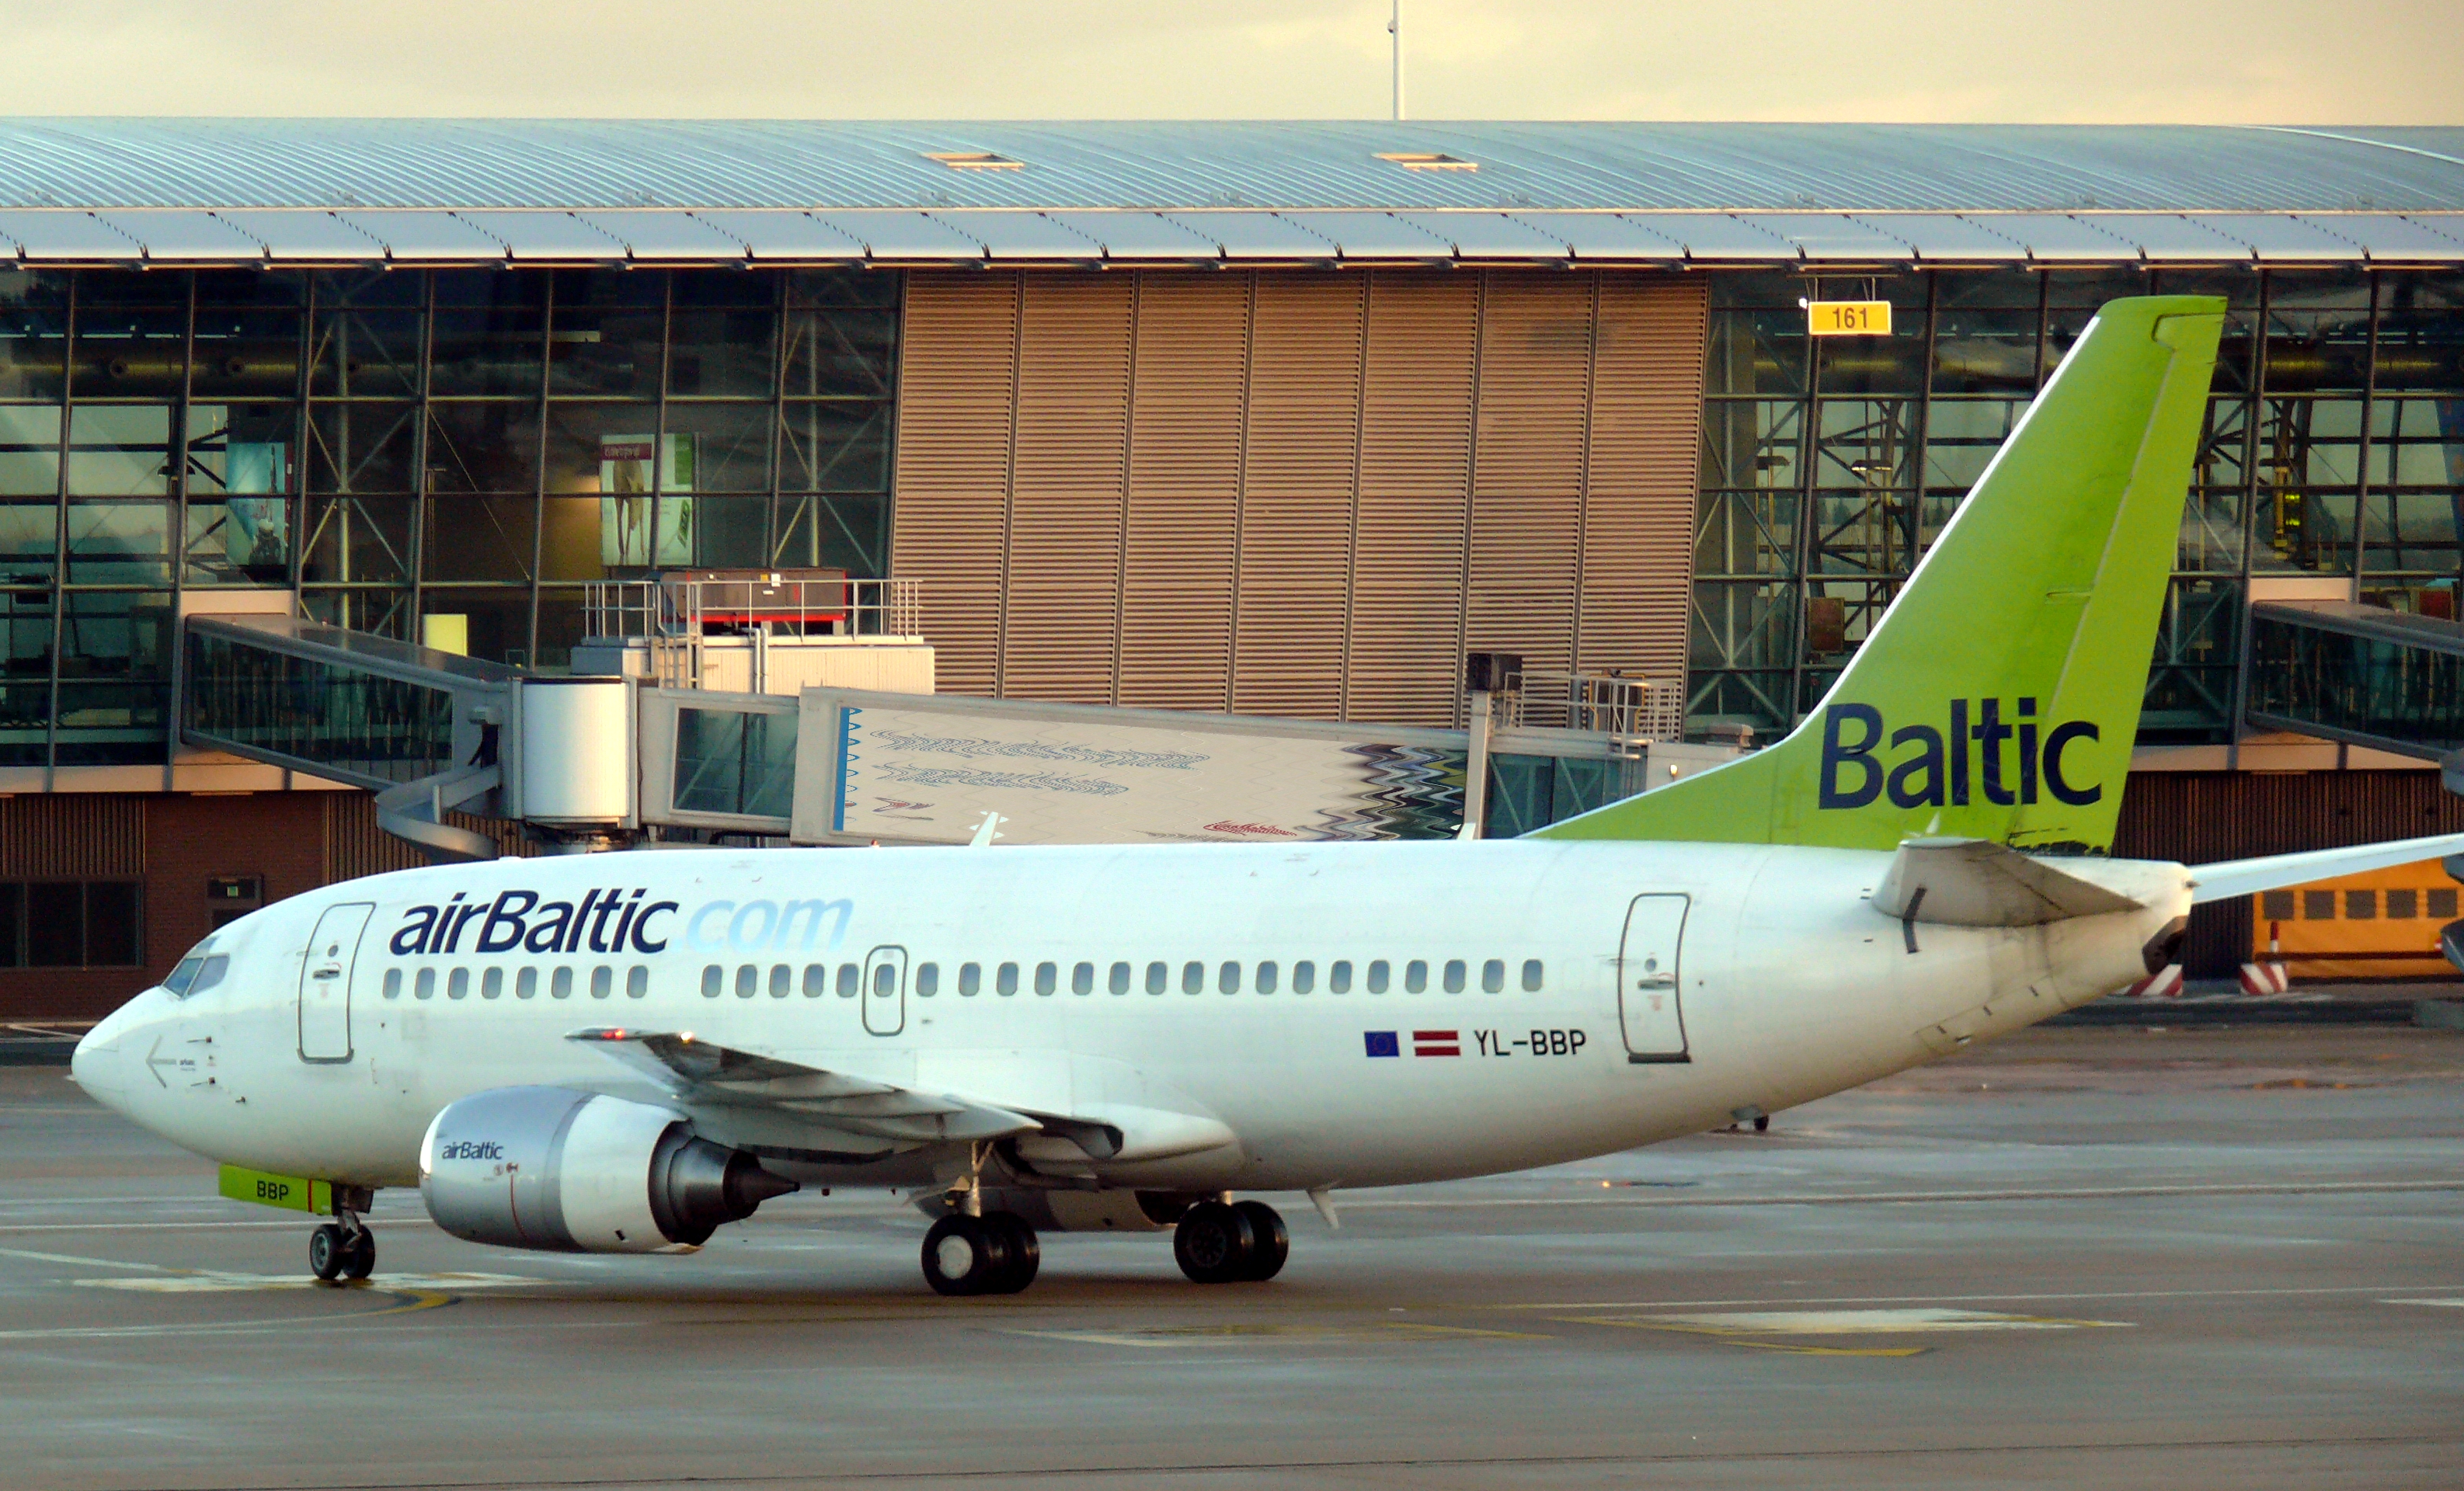 Brussels airport air baltic 02